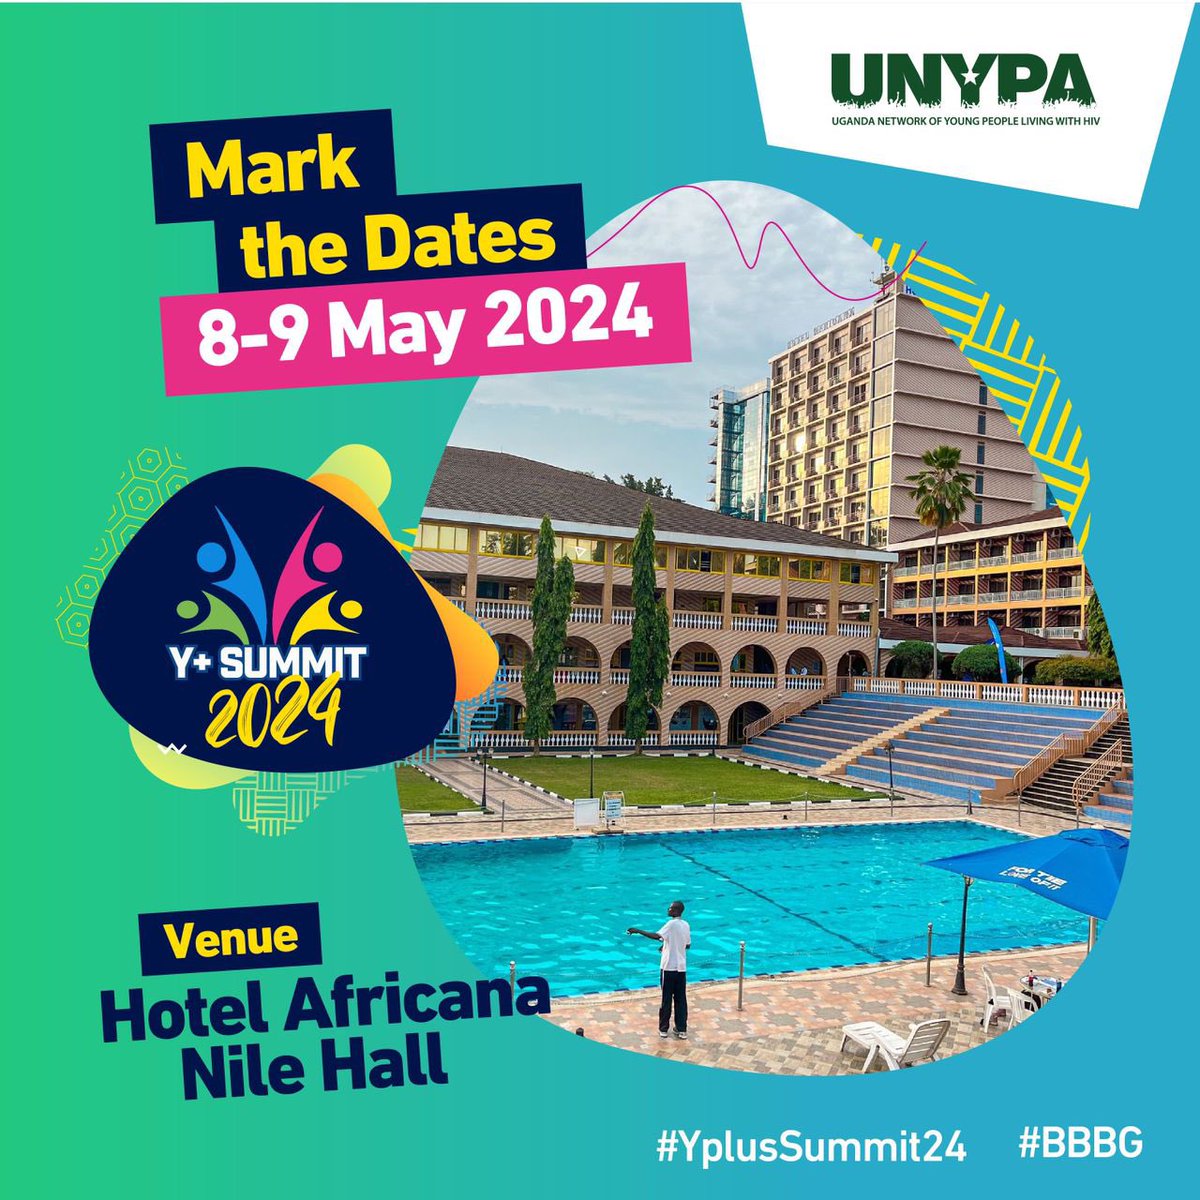 .@UNYPA1 is back with the annual Y+summit. This is an event where the biggest number of young people living with HIV in Uganda convene for exchange learning on HIV other young people’s Sexual reproductive health and rights related issues. #SomethingNeedsToChange #YPlusSummit